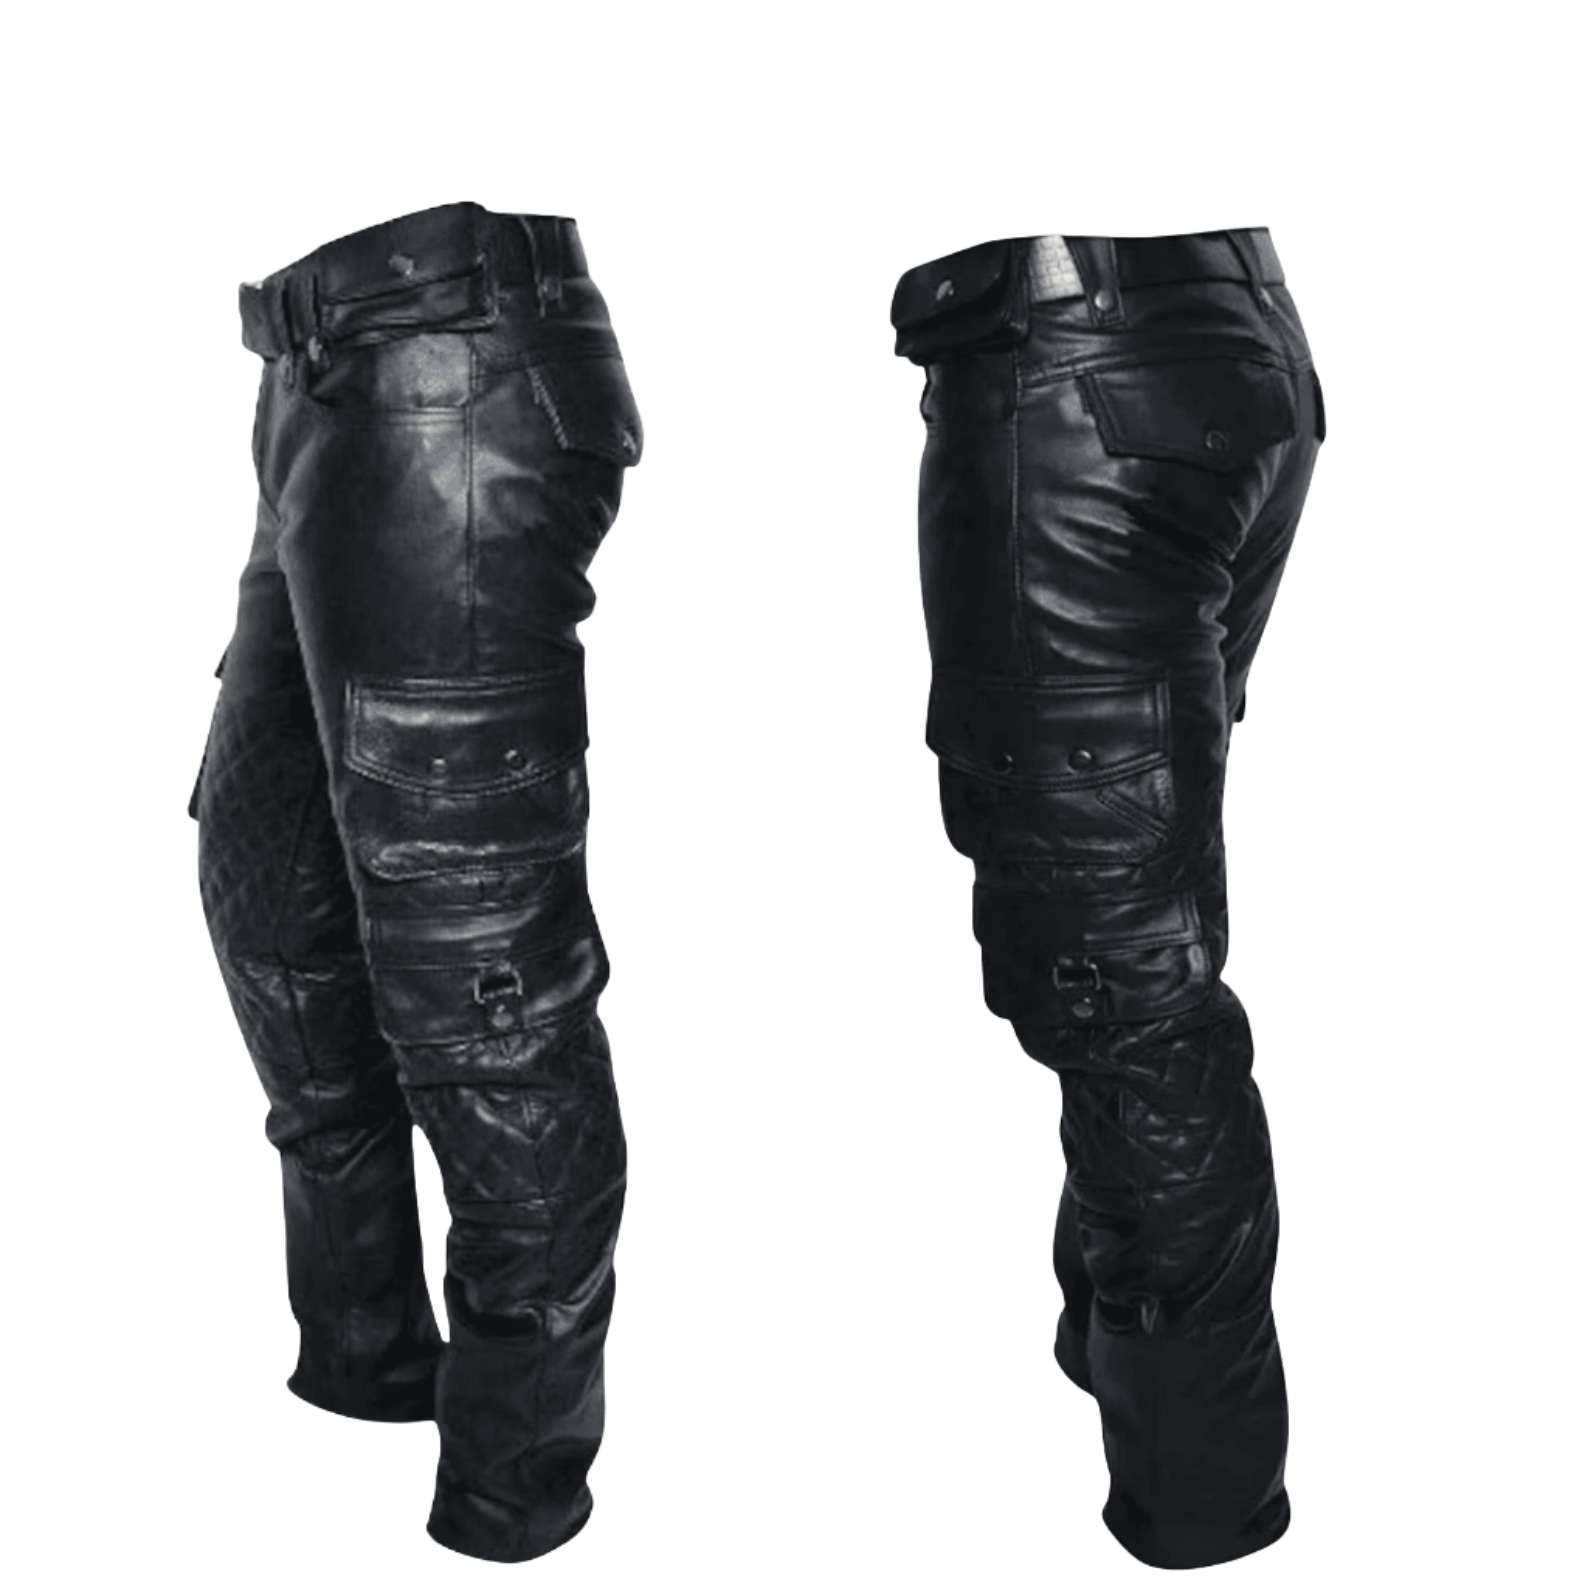 Attileo Mens Black Genuine Leather Pants - Stylish Casual Wear Quilted Real Leather Cargo Pants Trousers 40 (101.cm) / 32 (81.3 cm)